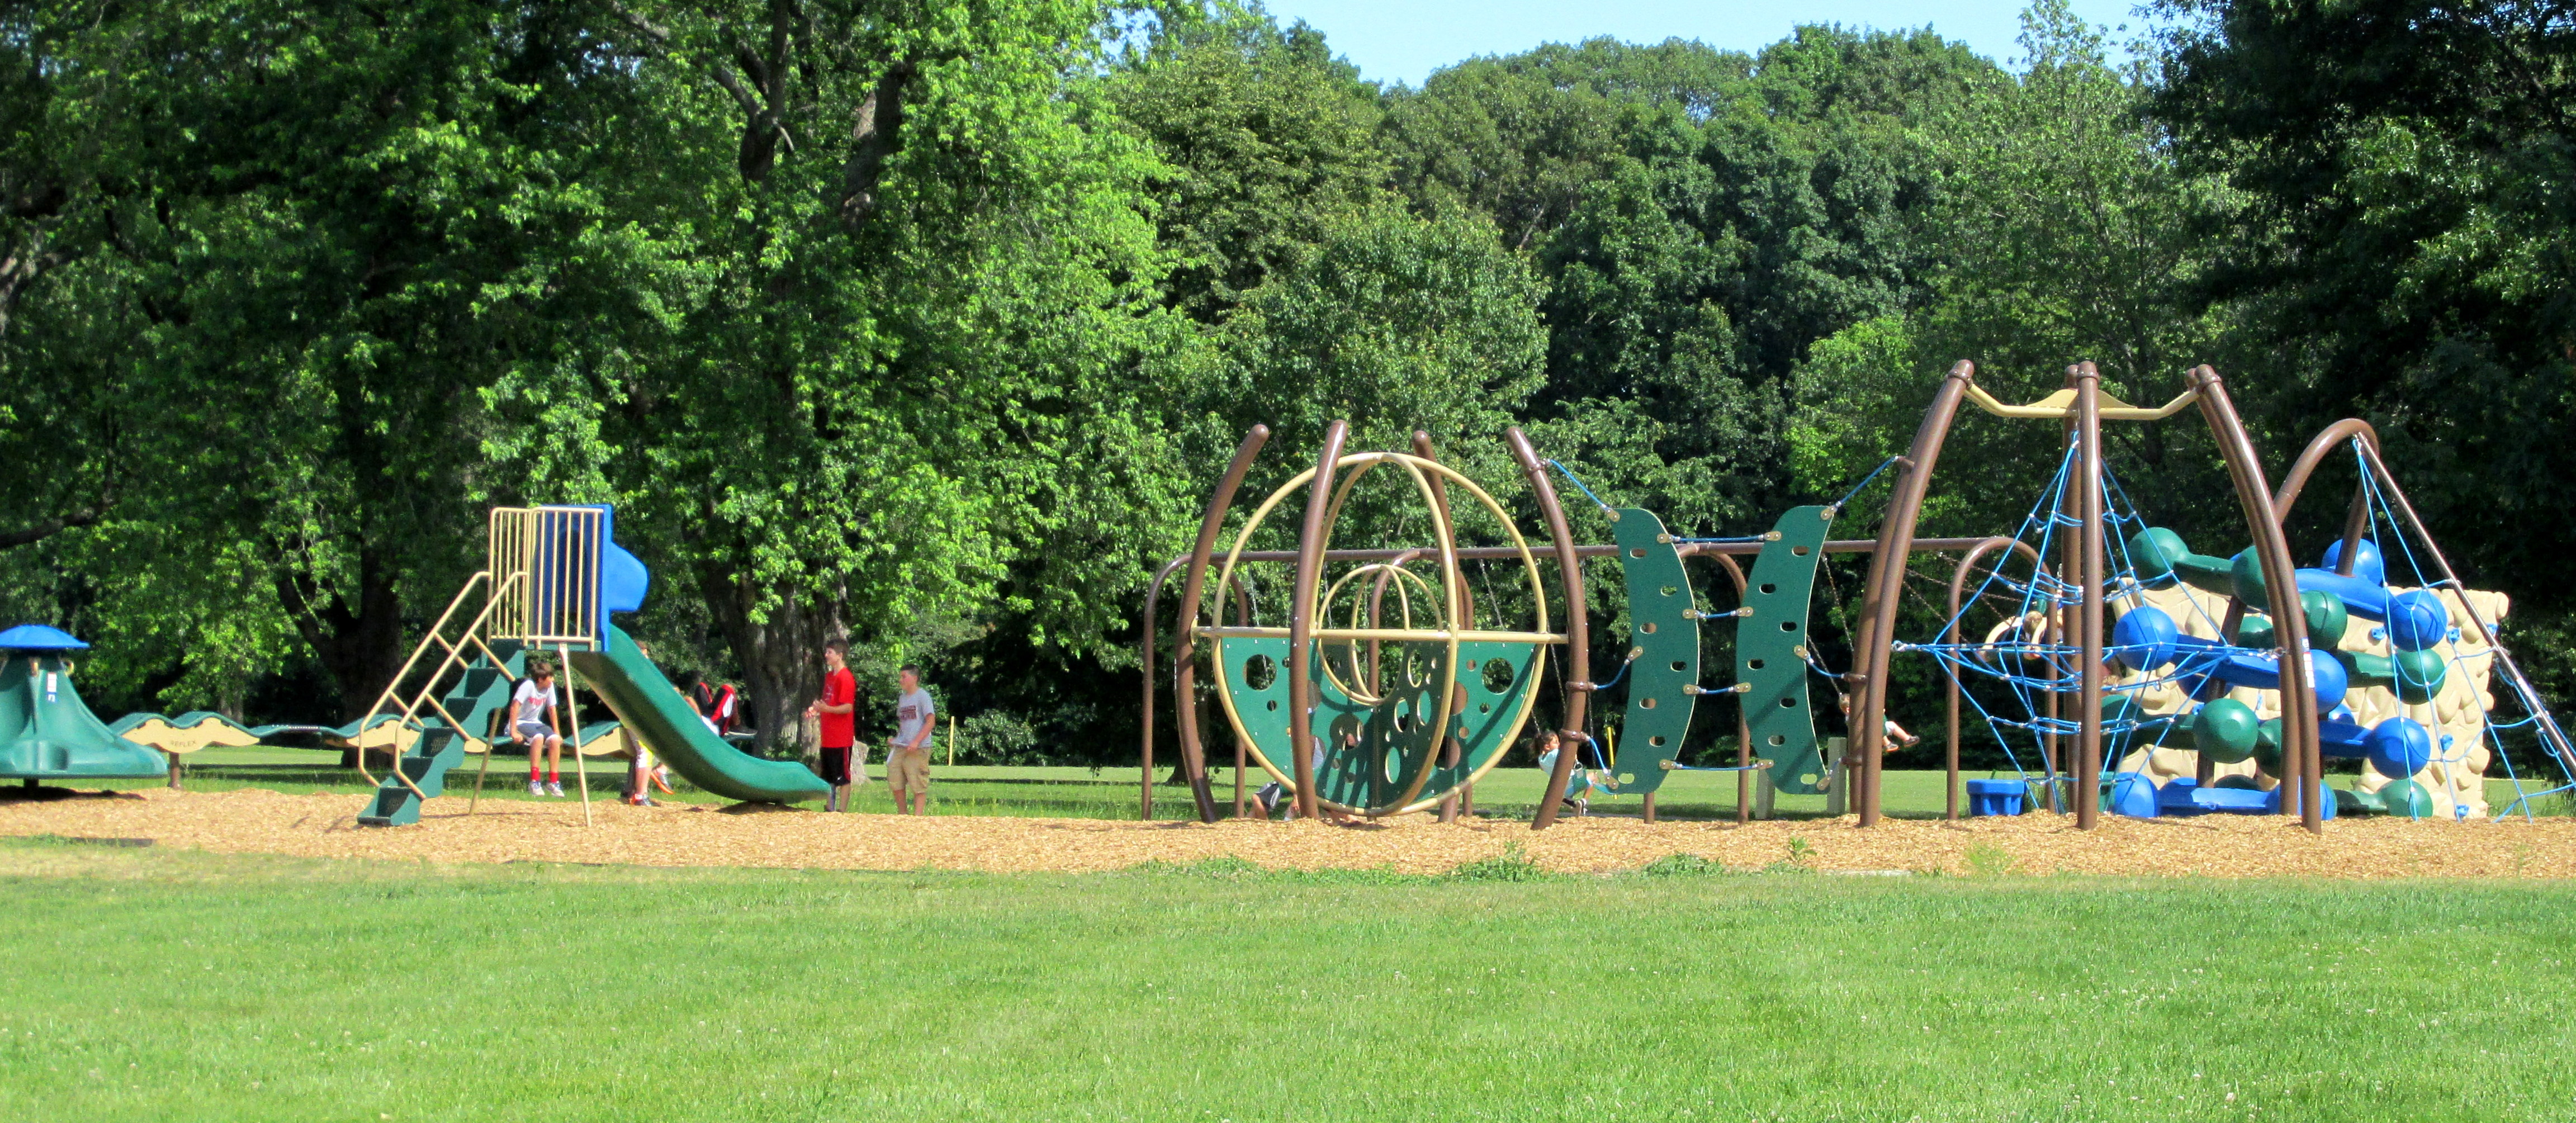 Park It Here in Haverhill - New Playground Apparatus at Riverside Park.